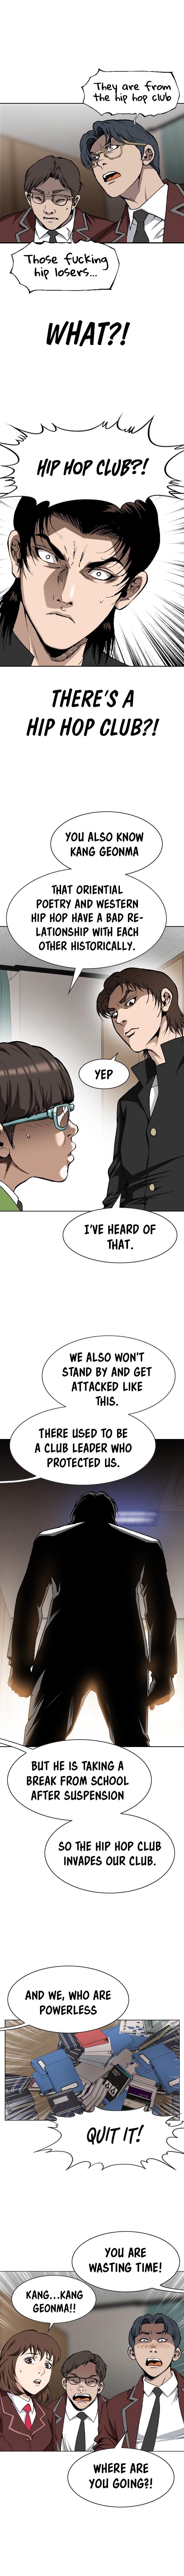 Show Me the Lucky-Boss! Chapter 5 - Page 3